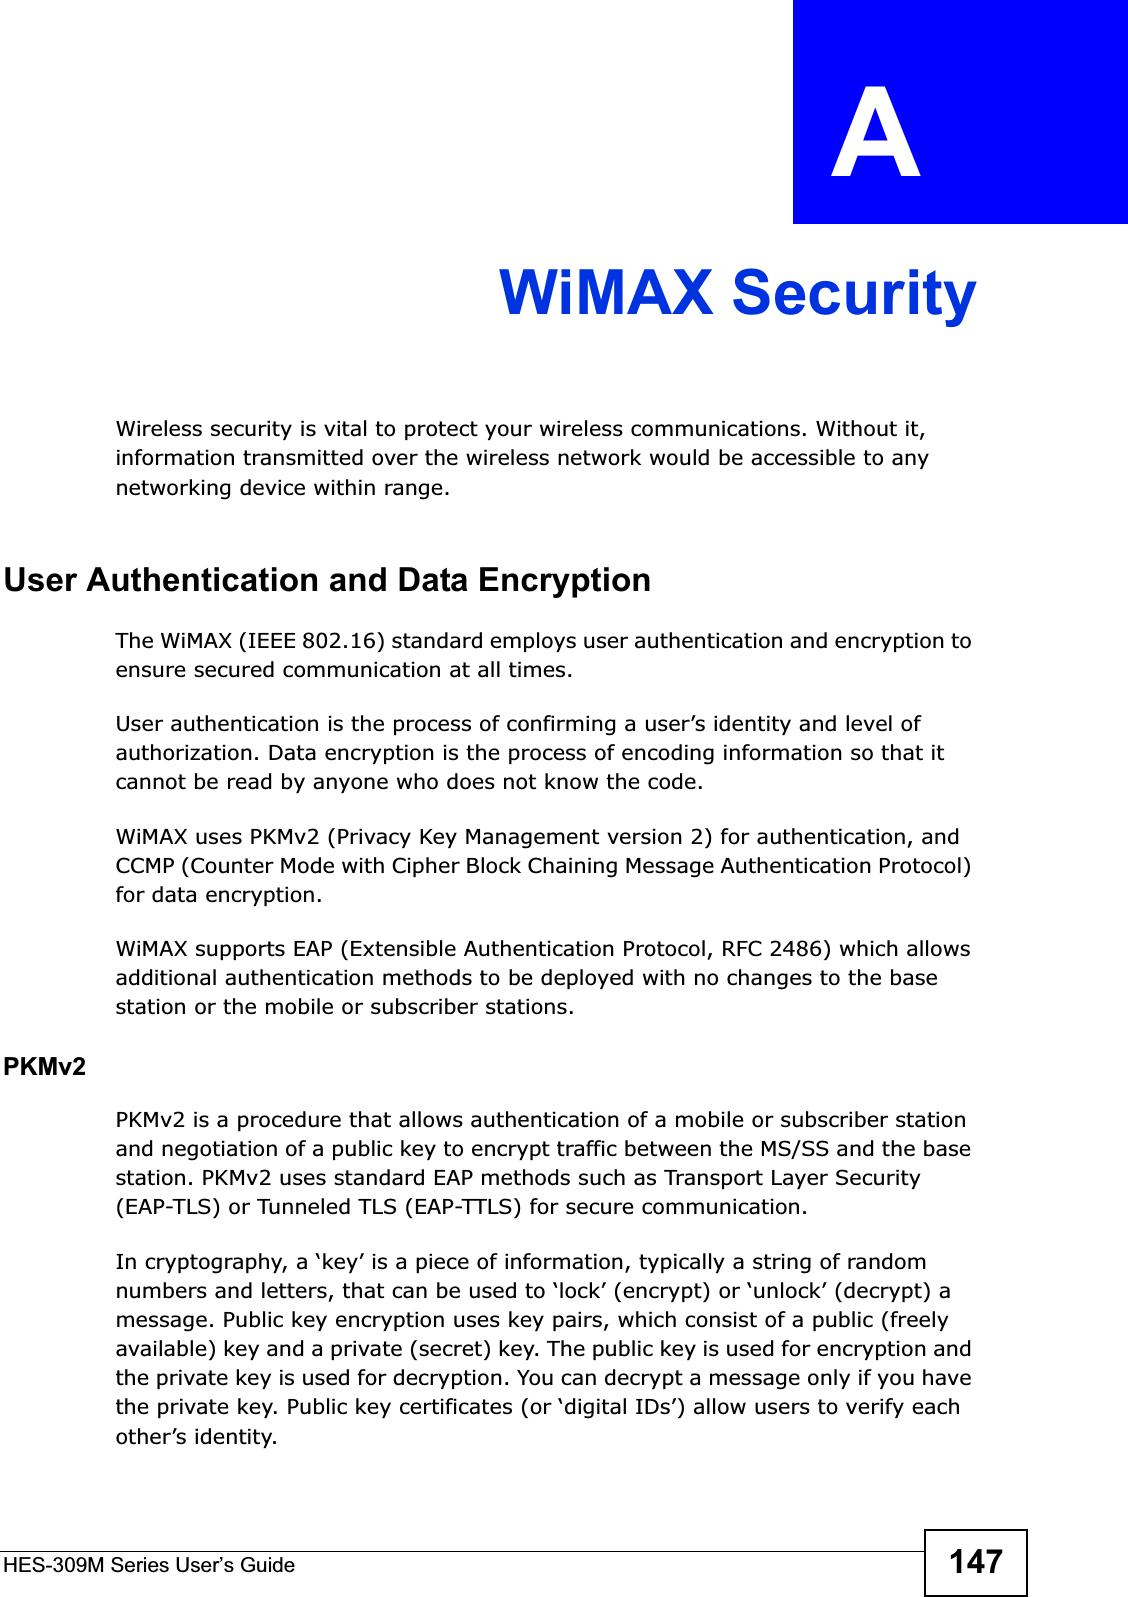 HES-309M Series User’s Guide 147APPENDIX  A WiMAX SecurityWireless security is vital to protect your wireless communications. Without it, information transmitted over the wireless network would be accessible to any networking device within range.User Authentication and Data EncryptionThe WiMAX (IEEE 802.16) standard employs user authentication and encryption to ensure secured communication at all times.User authentication is the process of confirming a user’s identity and level of authorization. Data encryption is the process of encoding information so that it cannot be read by anyone who does not know the code. WiMAX uses PKMv2 (Privacy Key Management version 2) for authentication, and CCMP (Counter Mode with Cipher Block Chaining Message Authentication Protocol) for data encryption. WiMAX supports EAP (Extensible Authentication Protocol, RFC 2486) which allows additional authentication methods to be deployed with no changes to the base station or the mobile or subscriber stations.PKMv2PKMv2 is a procedure that allows authentication of a mobile or subscriber station and negotiation of a public key to encrypt traffic between the MS/SS and the base station. PKMv2 uses standard EAP methods such as Transport Layer Security (EAP-TLS) or Tunneled TLS (EAP-TTLS) for secure communication. In cryptography, a ‘key’ is a piece of information, typically a string of random numbers and letters, that can be used to ‘lock’ (encrypt) or ‘unlock’ (decrypt) a message. Public key encryption uses key pairs, which consist of a public (freely available) key and a private (secret) key. The public key is used for encryption and the private key is used for decryption. You can decrypt a message only if you have the private key. Public key certificates (or ‘digital IDs’) allow users to verify each other’s identity. 